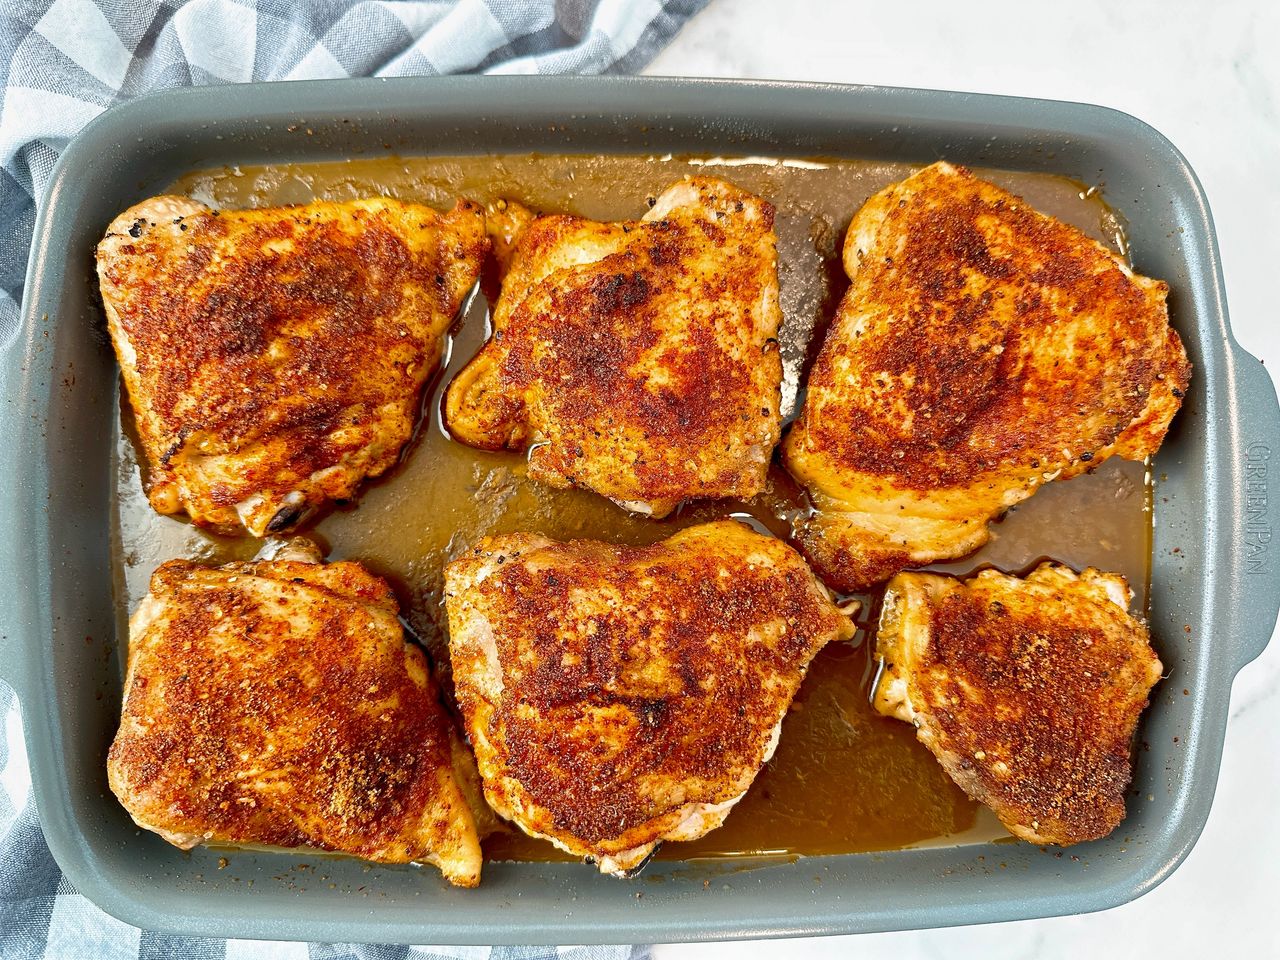 Baked Chicken Thighs (Crispy and Juicy!)